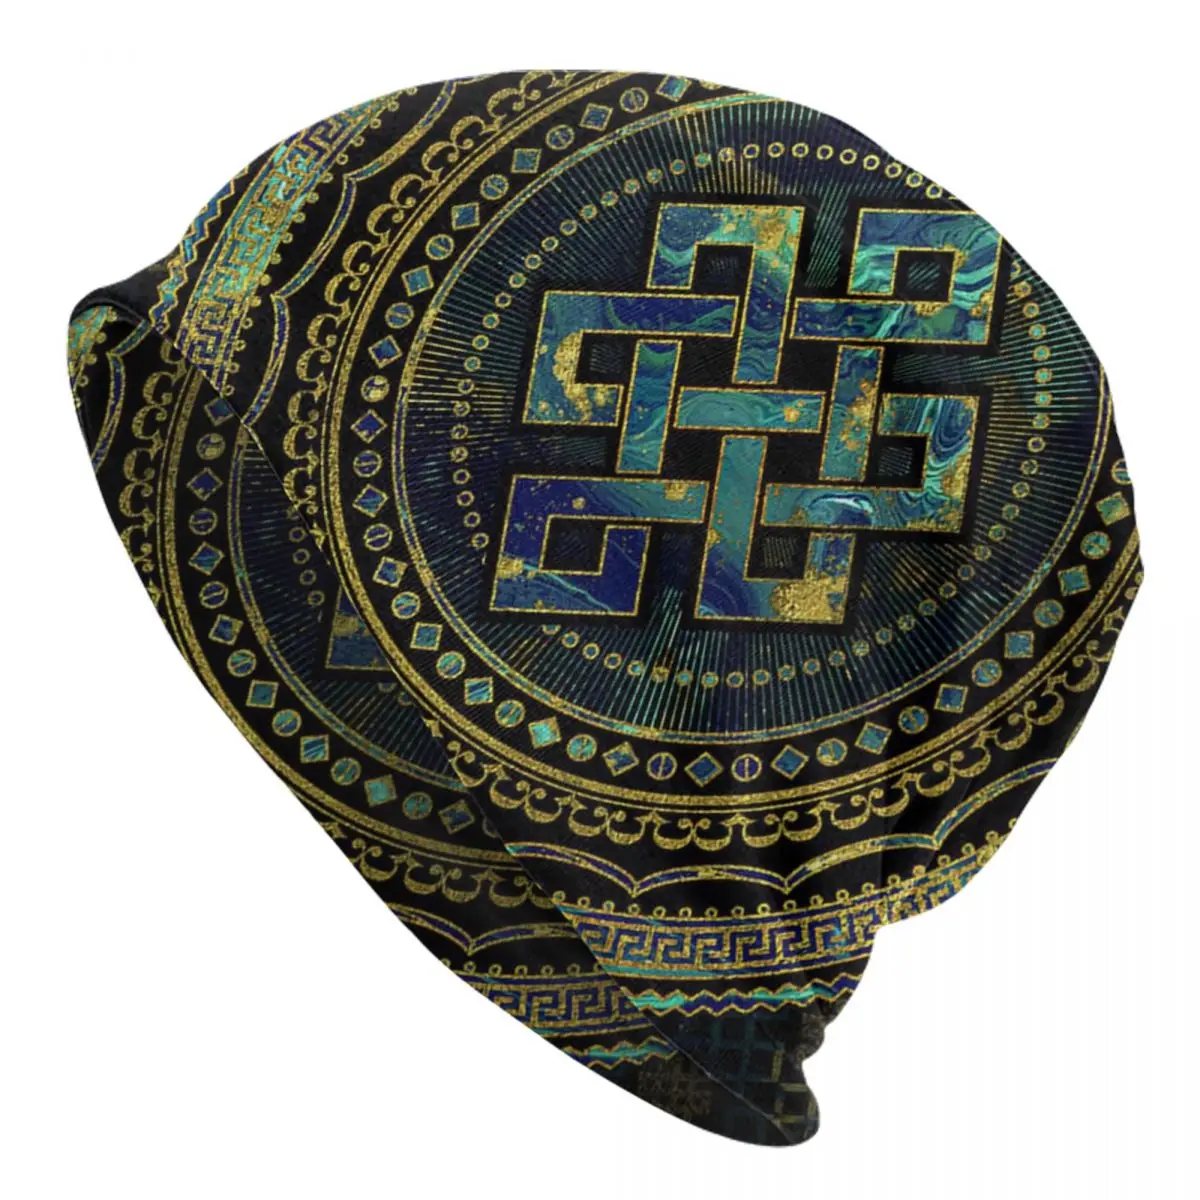 Marble And Abalone Endless Knot Adult Men's Women's Knit Hat Keep warm winter knitted hat